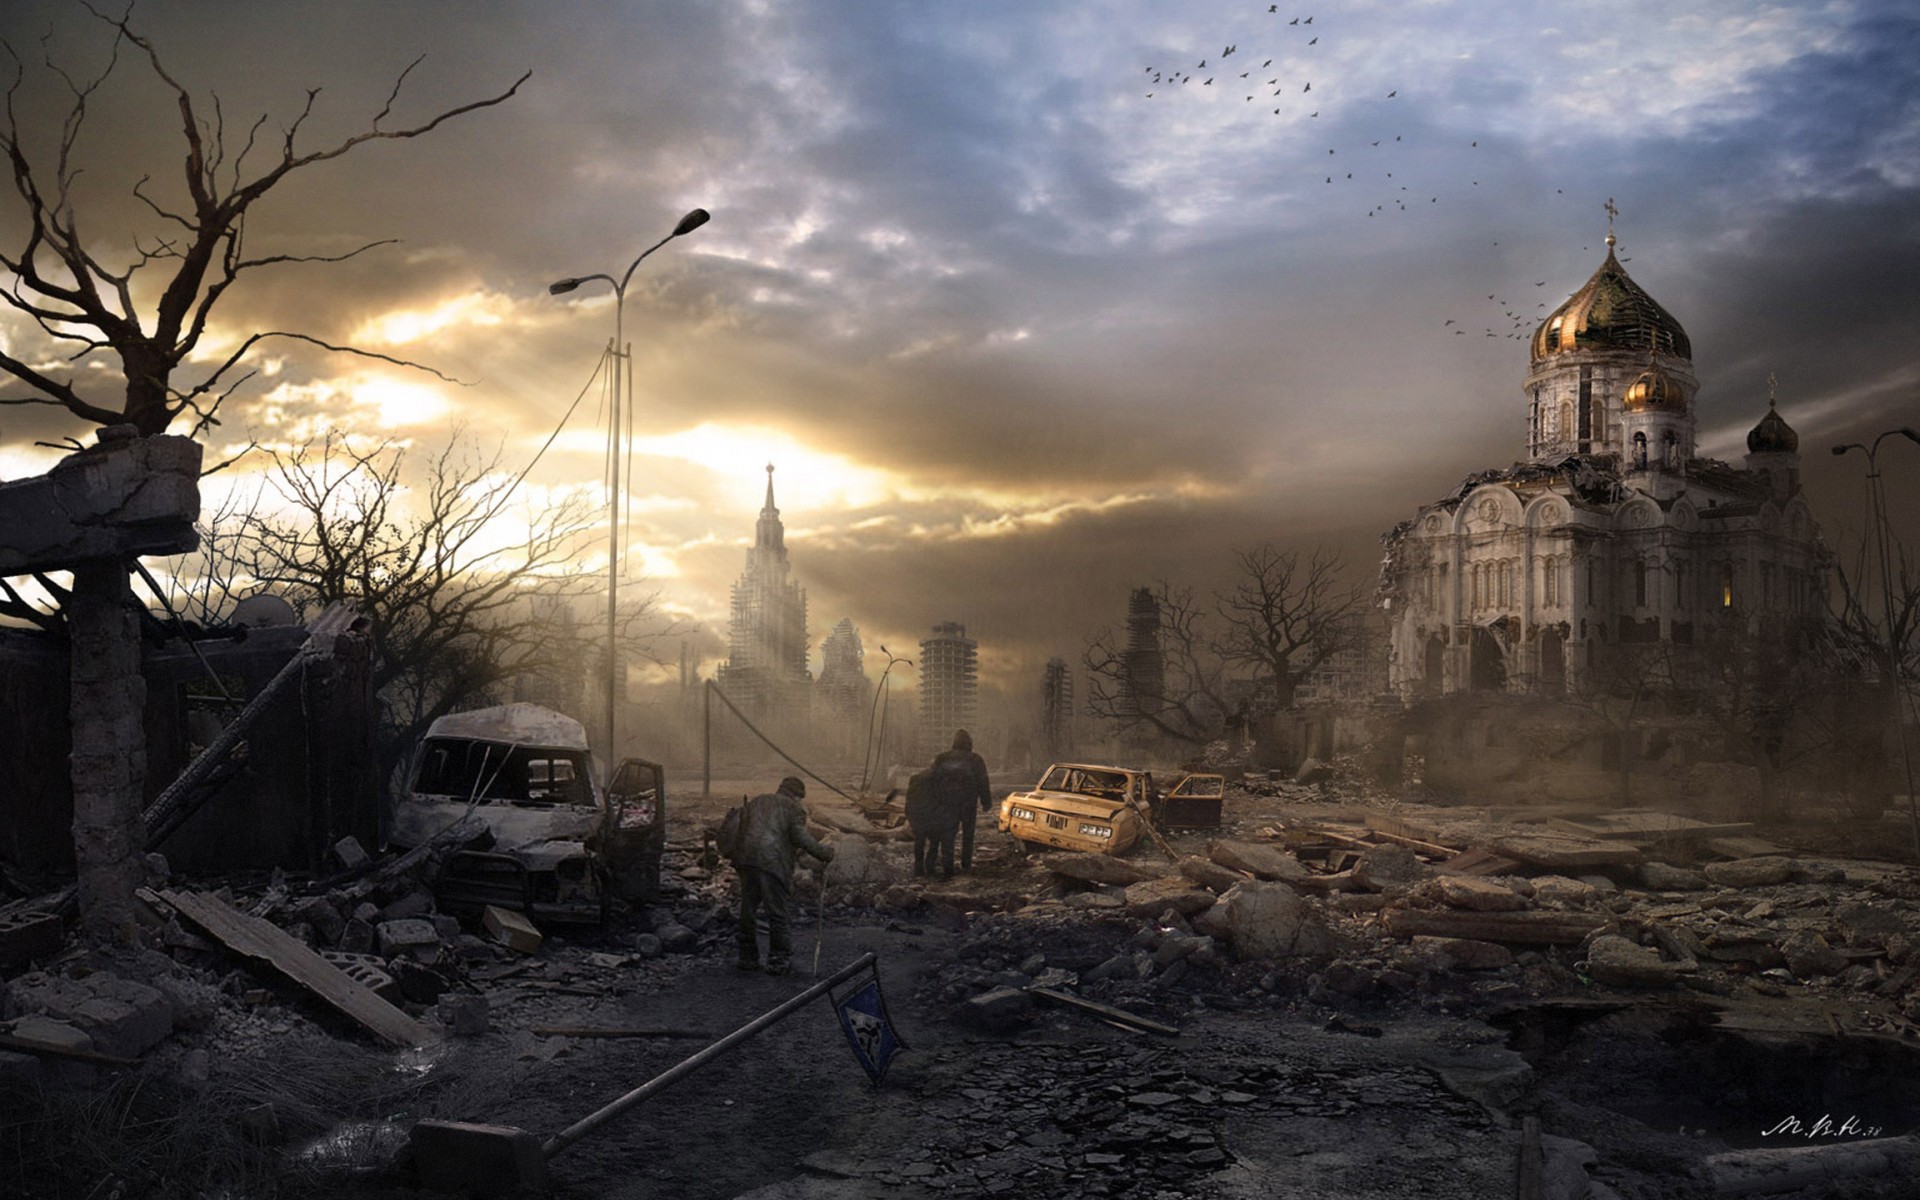  art end of the world nuclear war apocalyptic wallpaper background